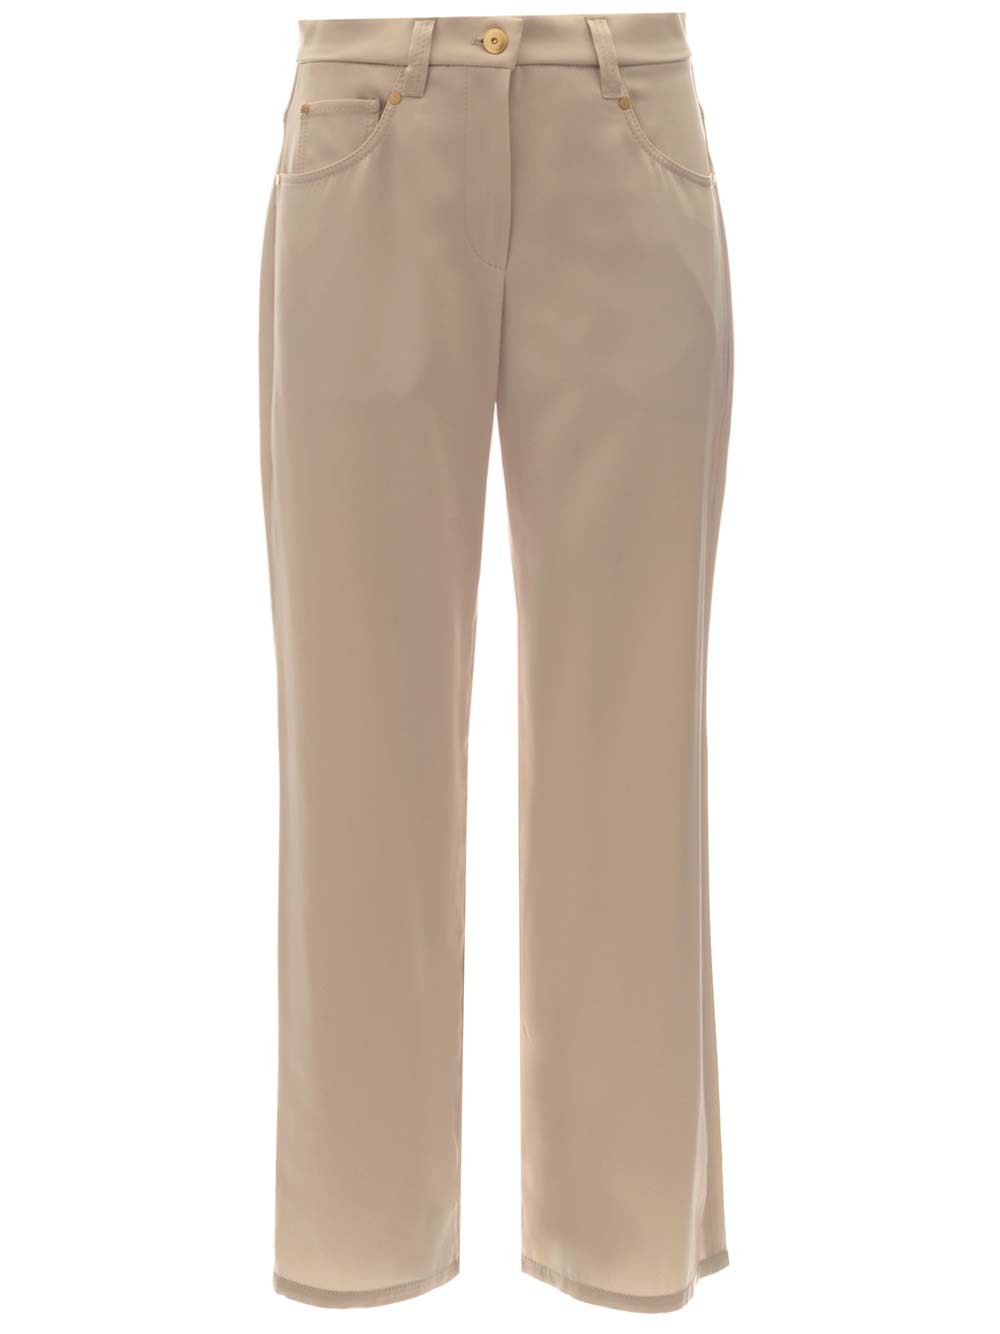 Satin Cady Trousers